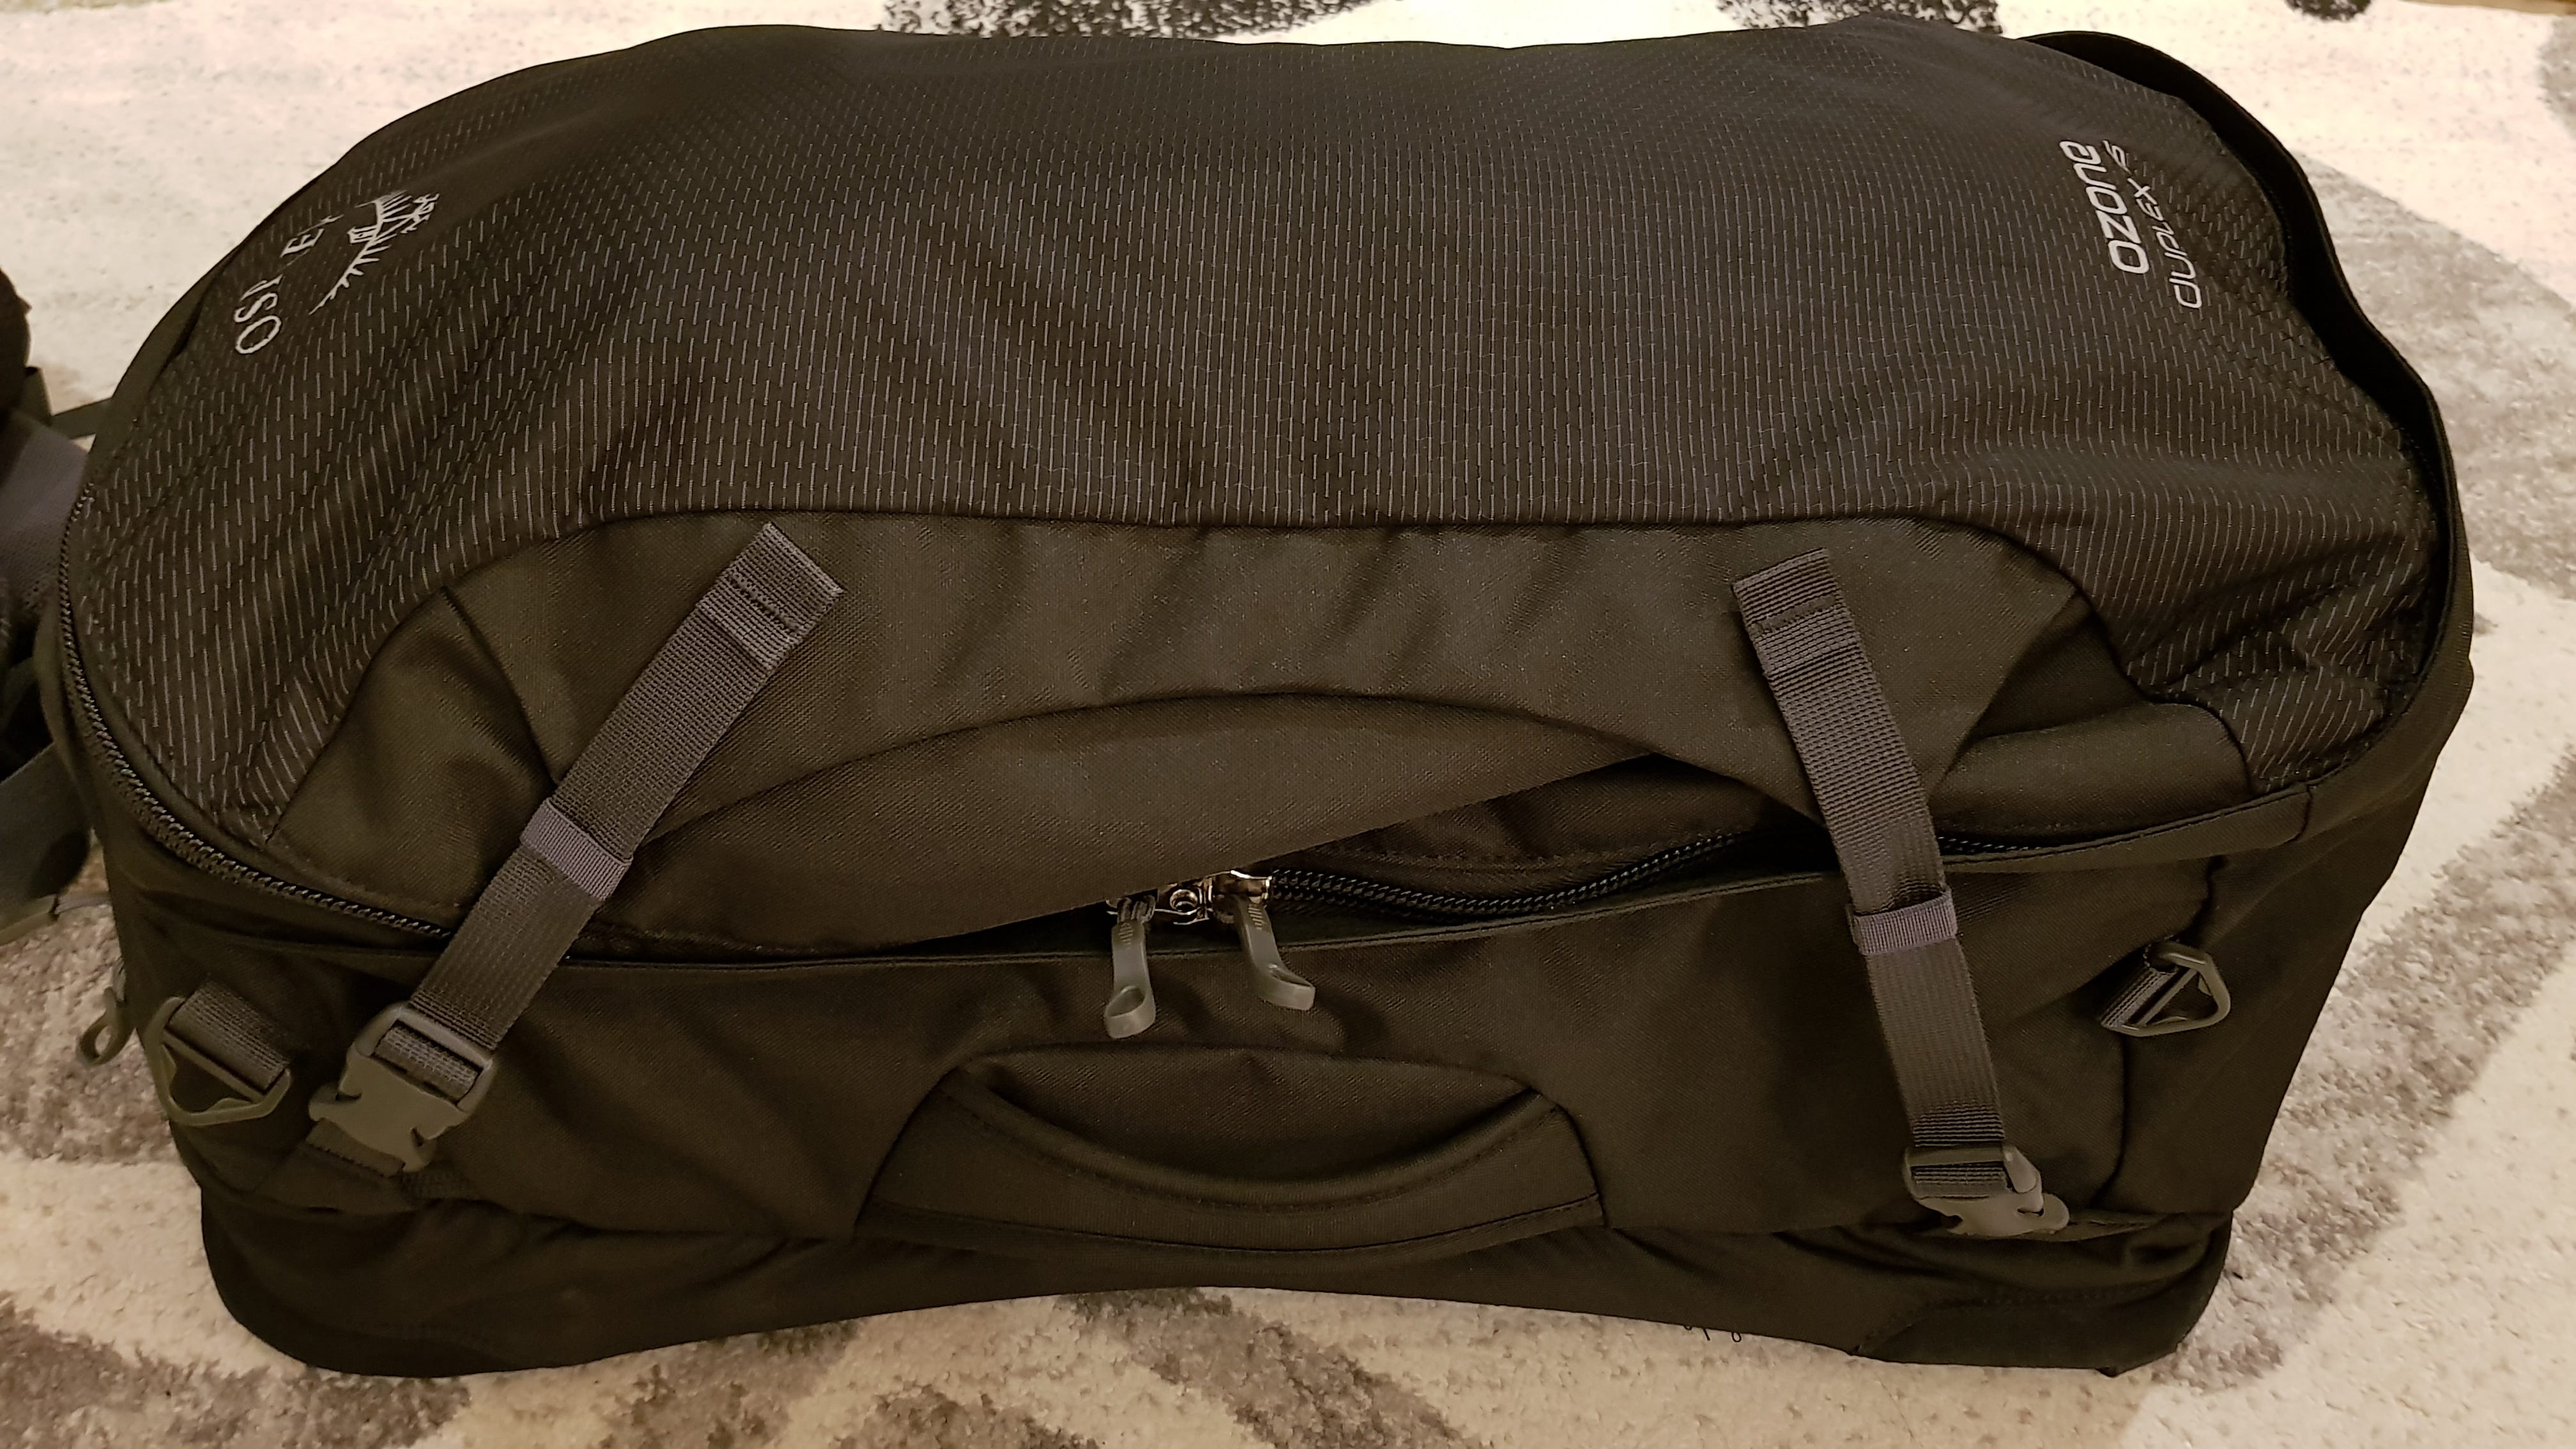 Ozone Boarding Bag - Personal-Size Carry-On Shoulder Luggage